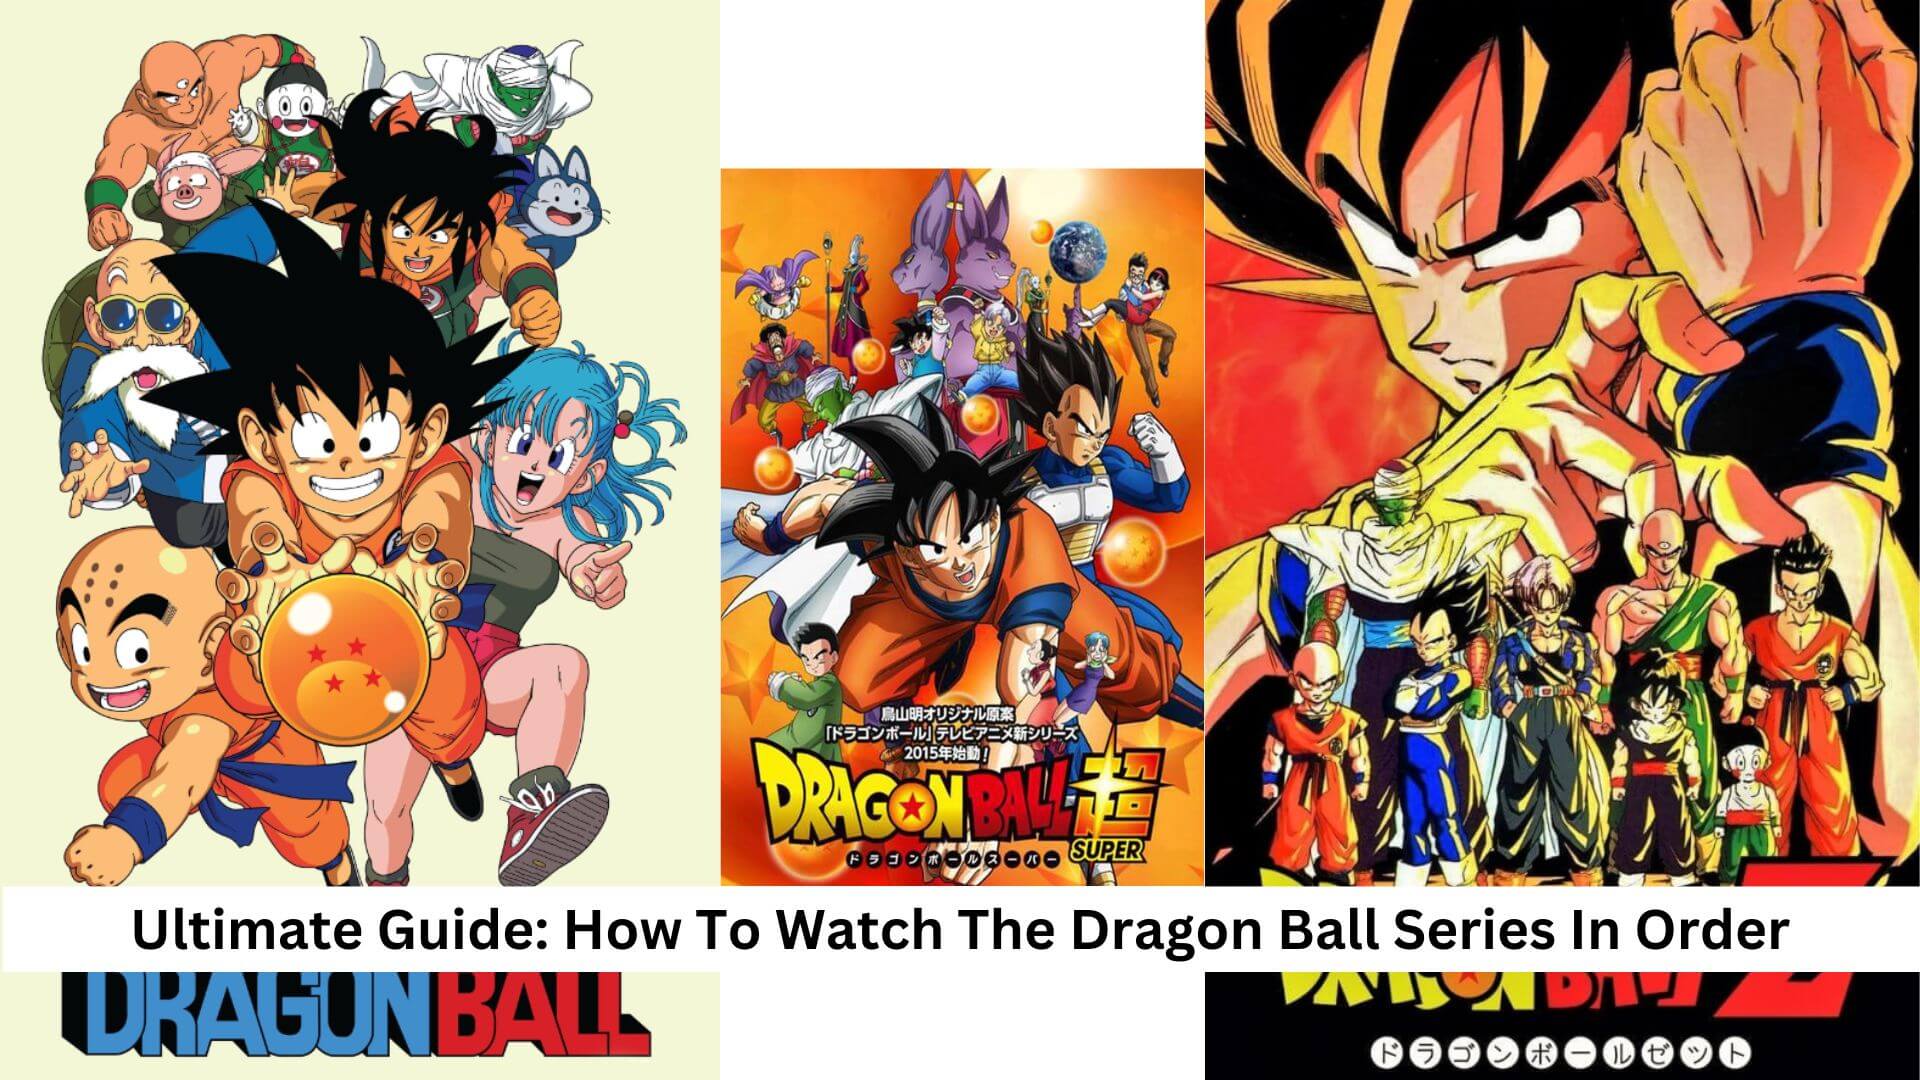 Ultimate Guide: How To Watch The Dragon Ball Series In Order